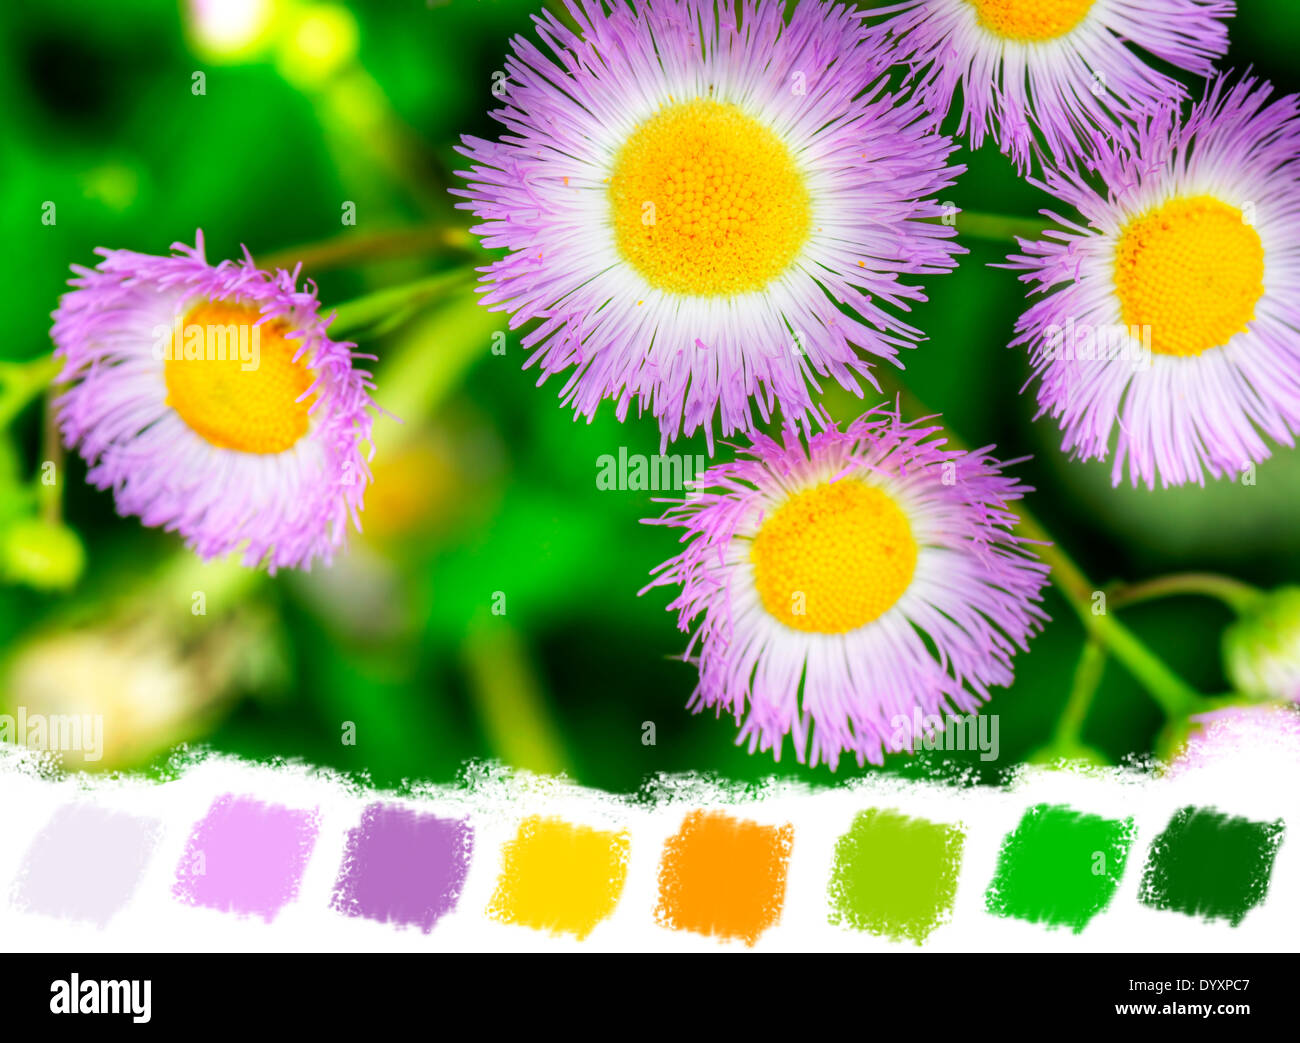 Common fleabane wildflower with contrasting purple, yellow and lush green, color palette Stock Photo